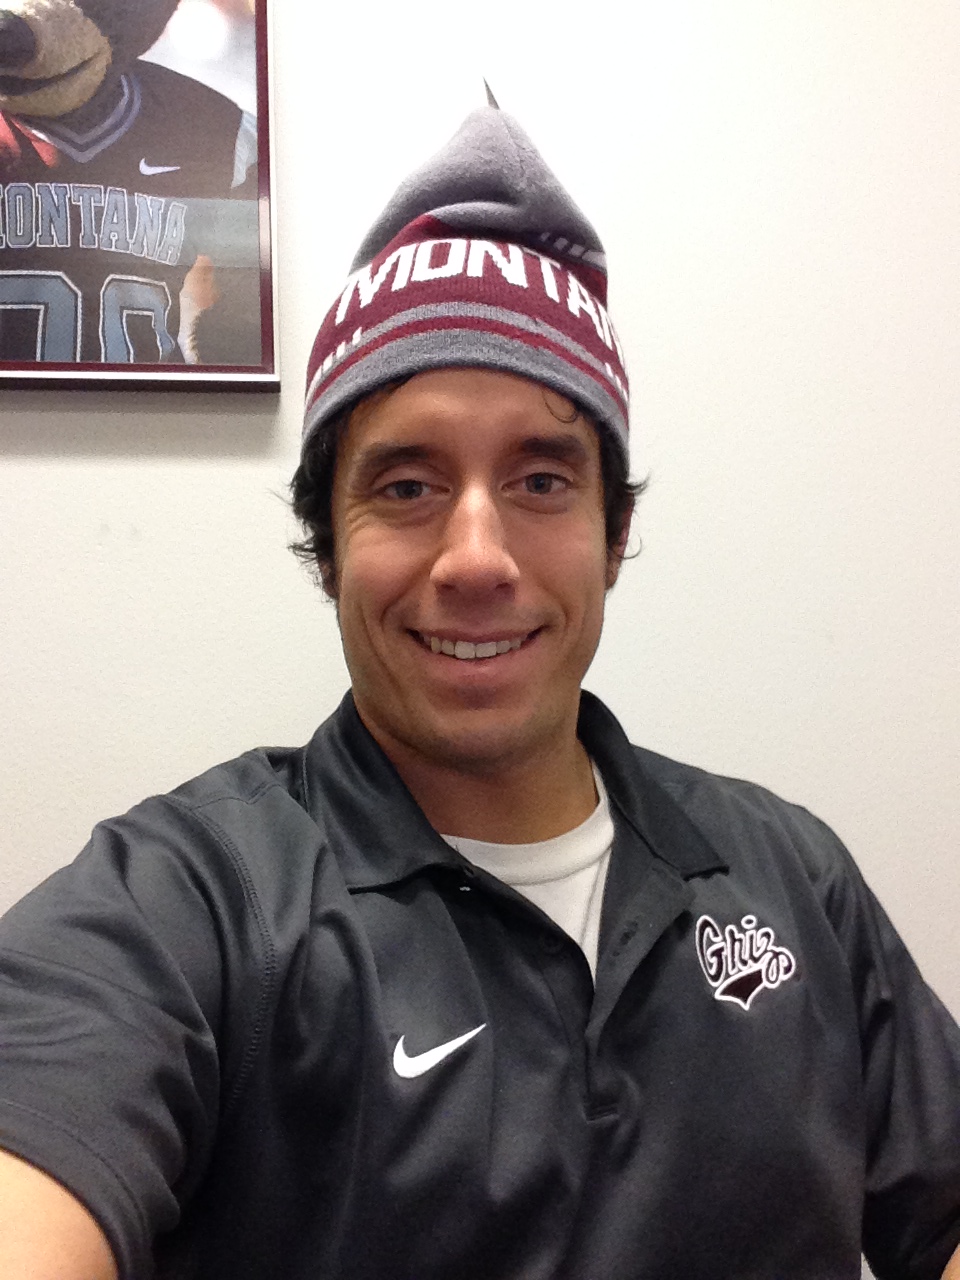 I considered getting this Griz beanie Christmas present from our Associate AD as a small victory.